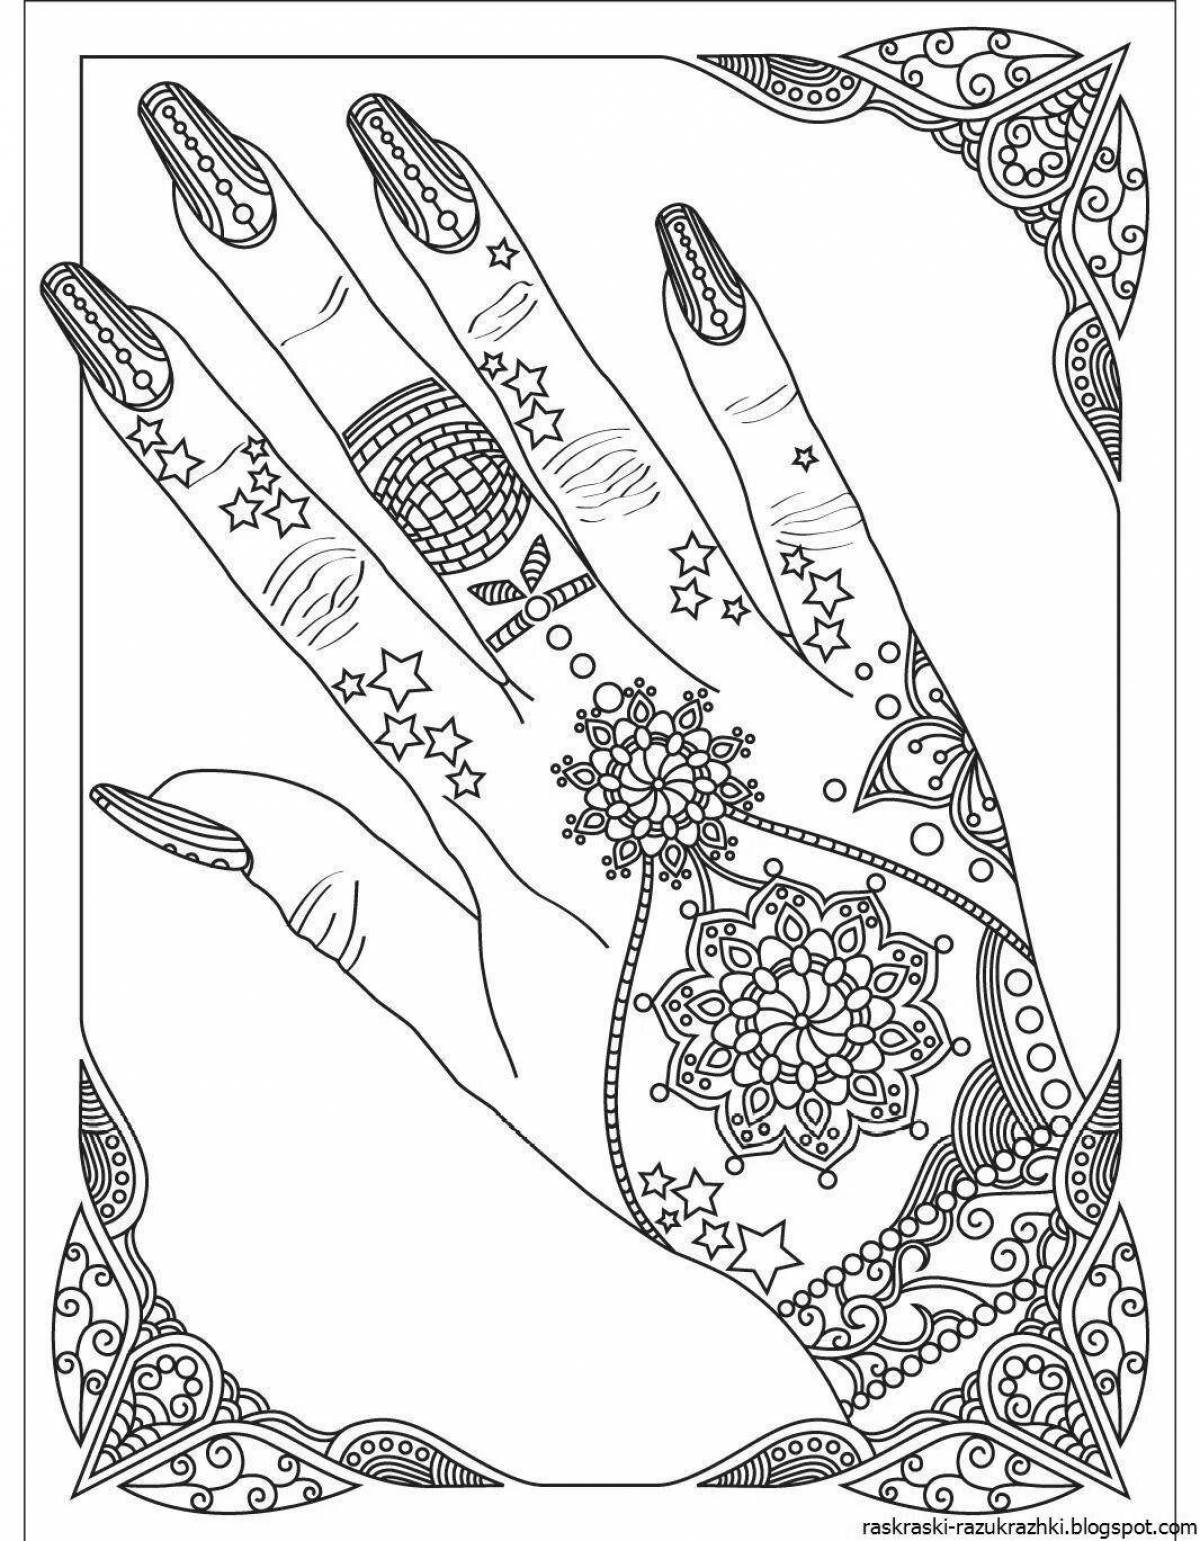 Fabulous manicure coloring book for girls